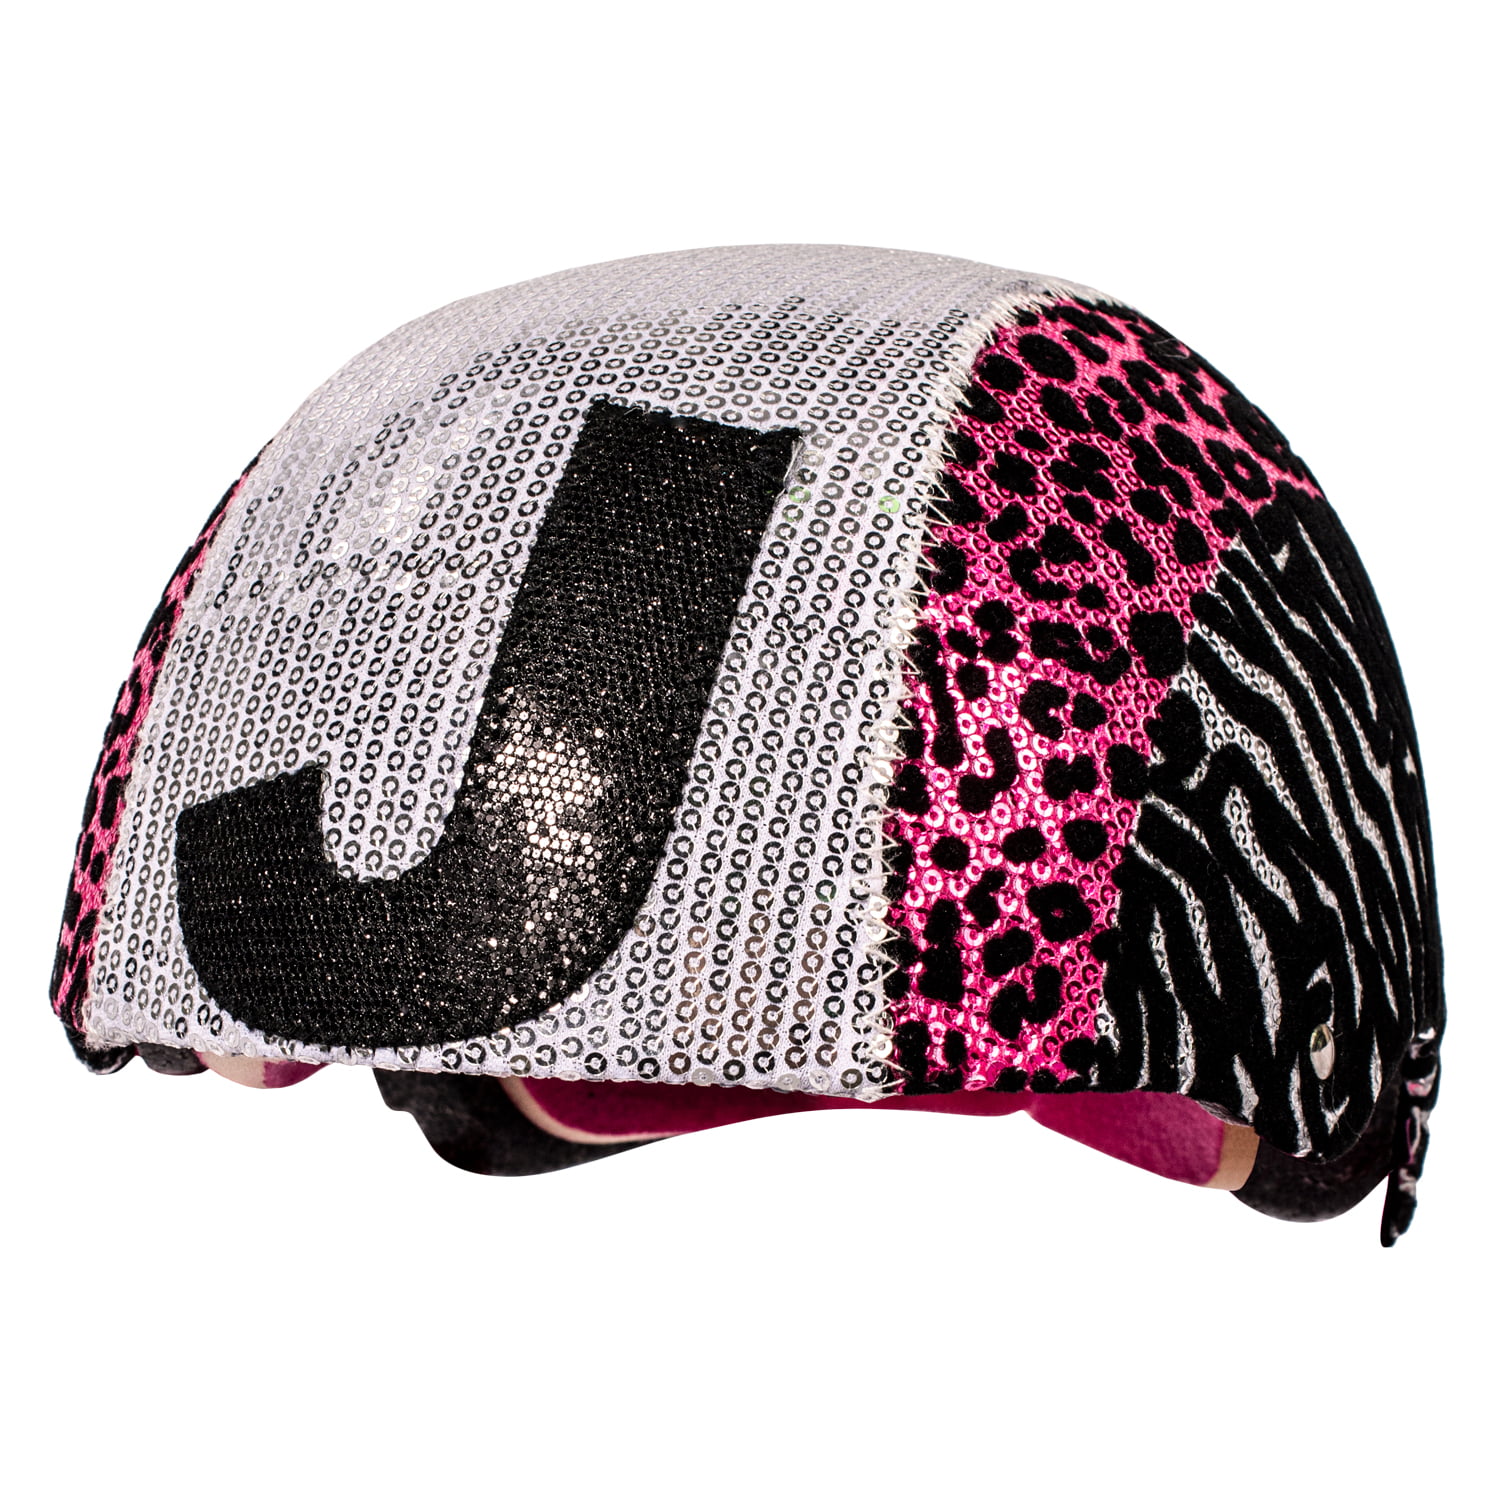 S -On the Go Glam Gear Helmet Raskullz for Justice Sequins Pink Leopard Ages 5+ 